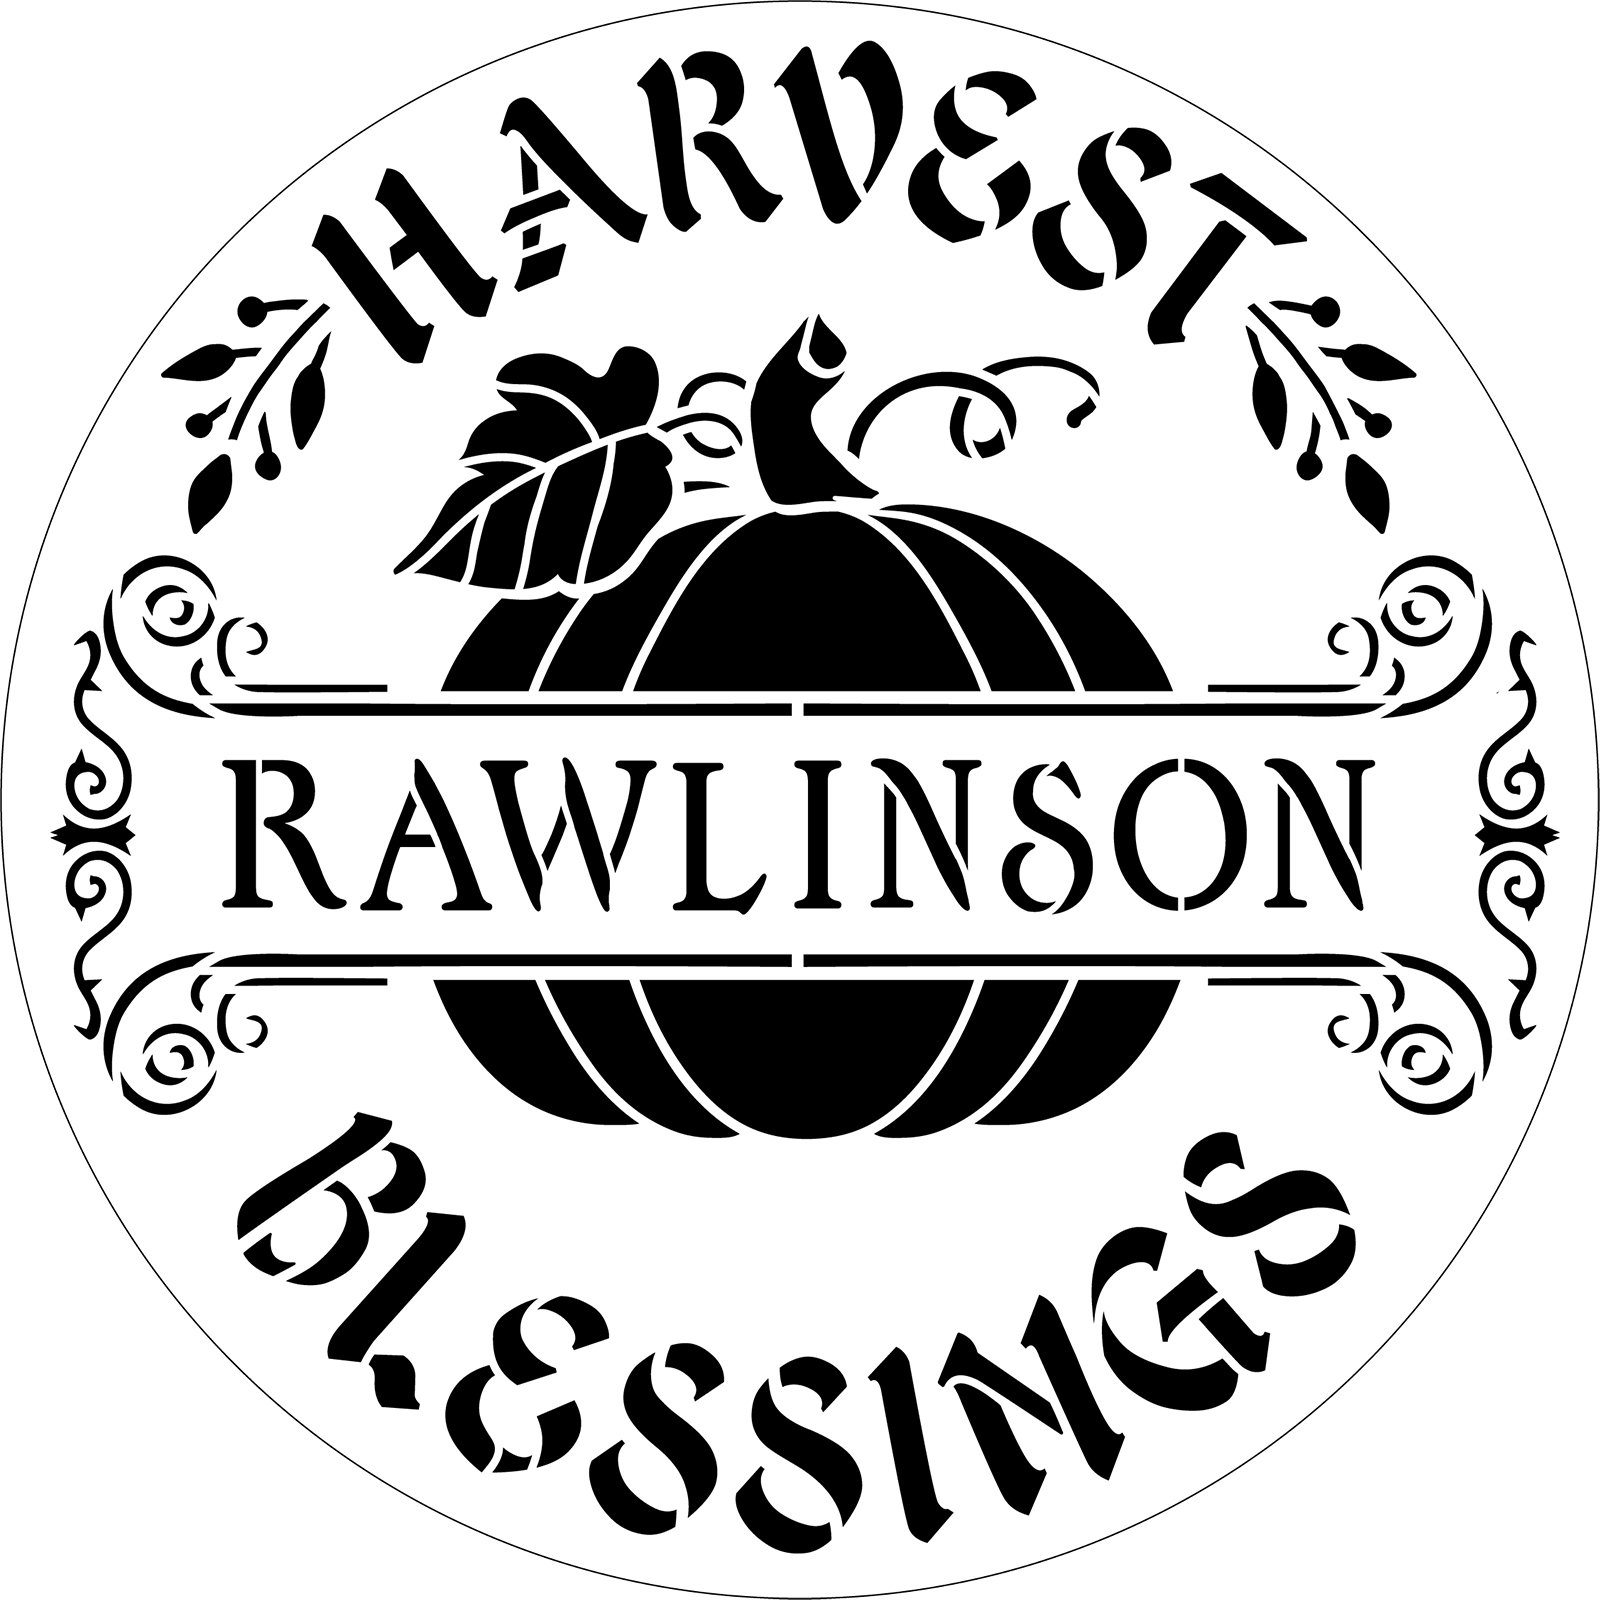 Personalized Harvest Blessings Stencil by StudioR12 - Select Size - USA Made - Craft DIY Fall & Family Home Decor | Paint Custom Wood Sign for Autumn | Reusable Mylar Template